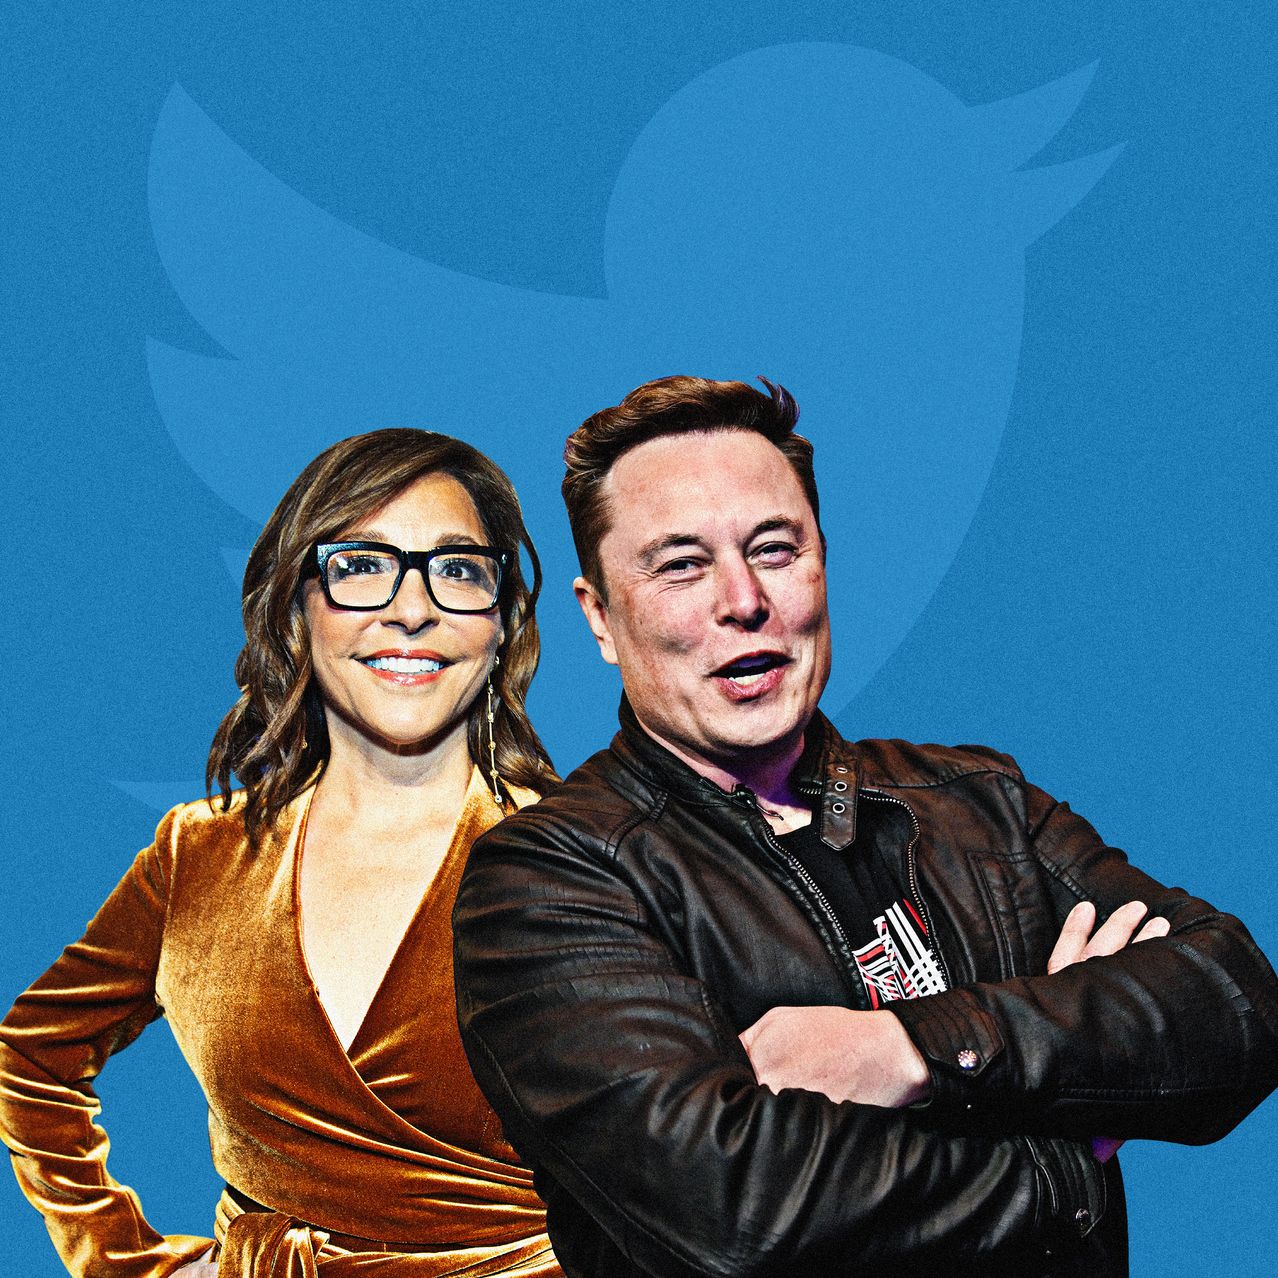 Linda Yaccarino, the new CEO of Twitter, and Elon Musk. PHOTO ILLUSTRATION BY EMIL LENDOF/THE WALL STREET JOURNAL; PHOTOS: GETTY IMAGES